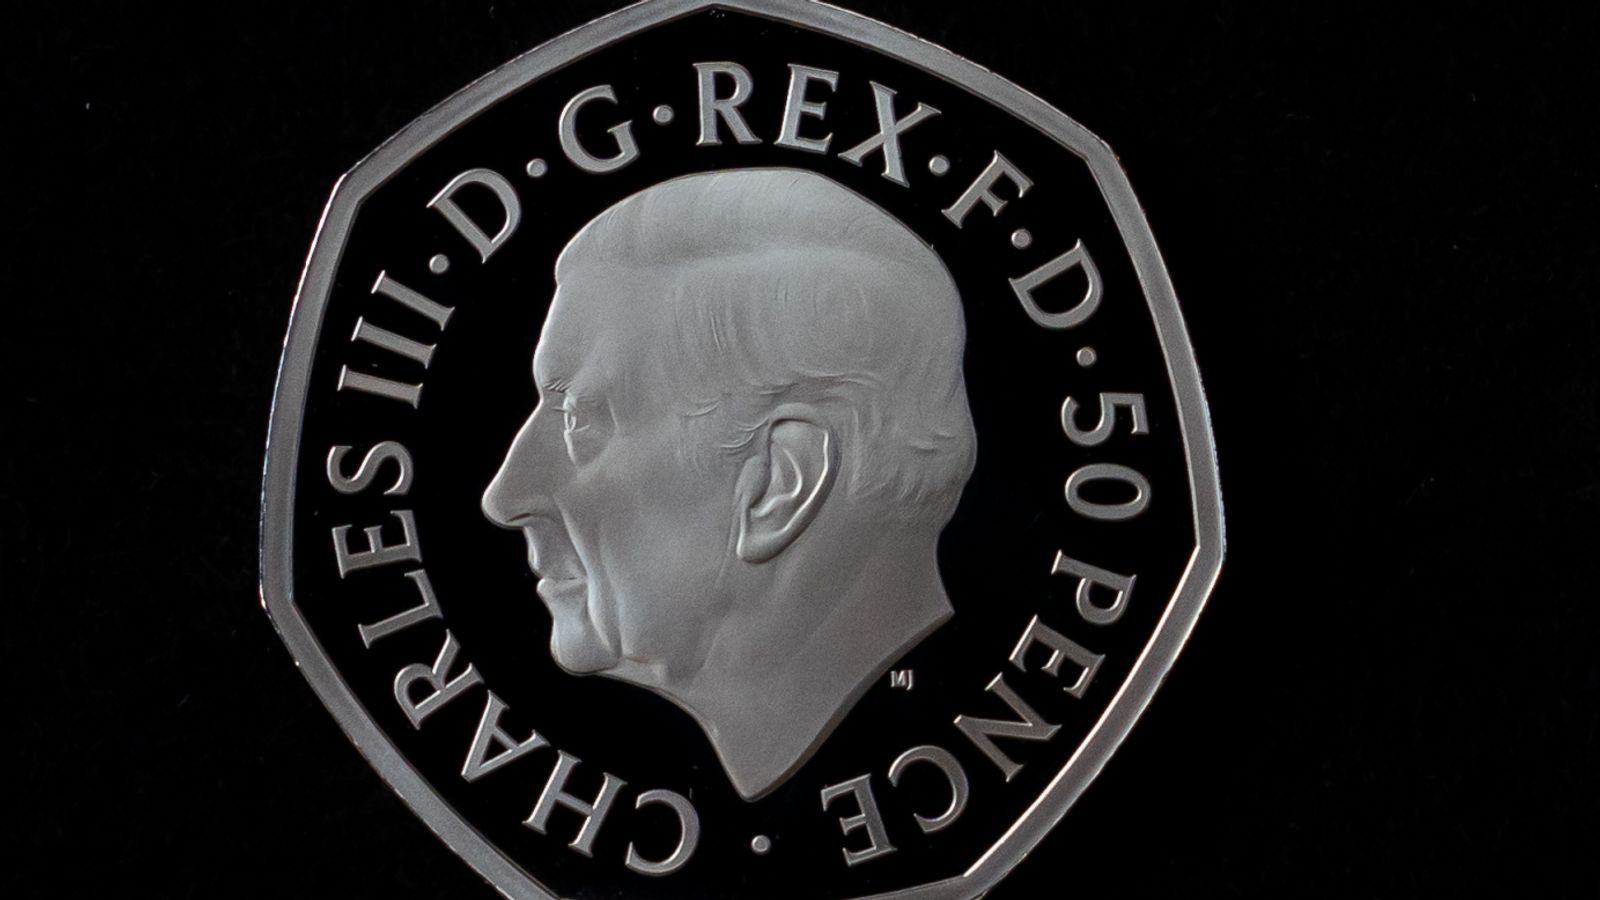 New UK coins featuring an image of King Charles revealed BreezyScroll